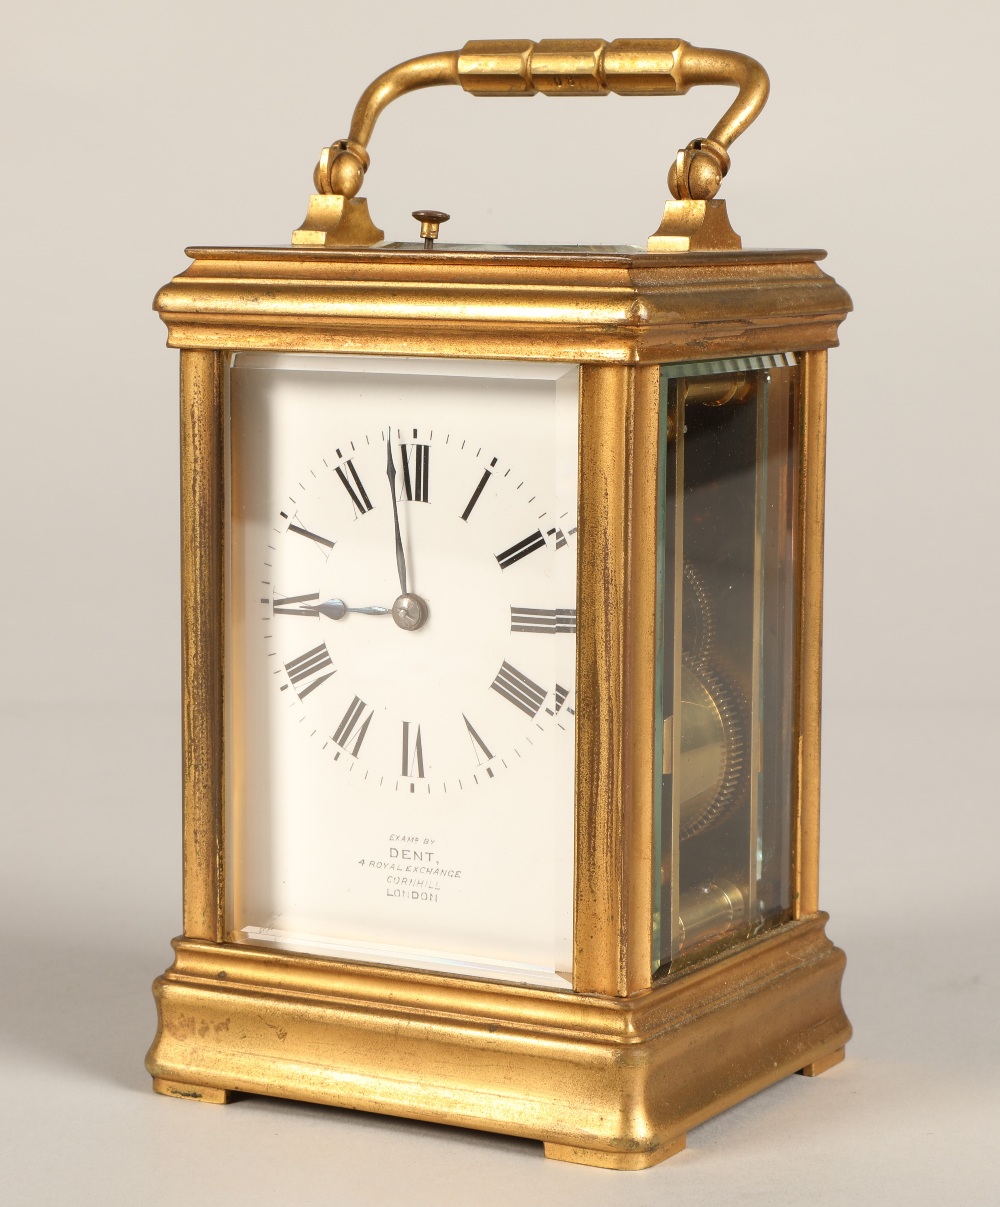 French brass repeating carriage clock, engraved AIGUILLES on the back,  Examp by Dent, 4 Royal - Bild 6 aus 12